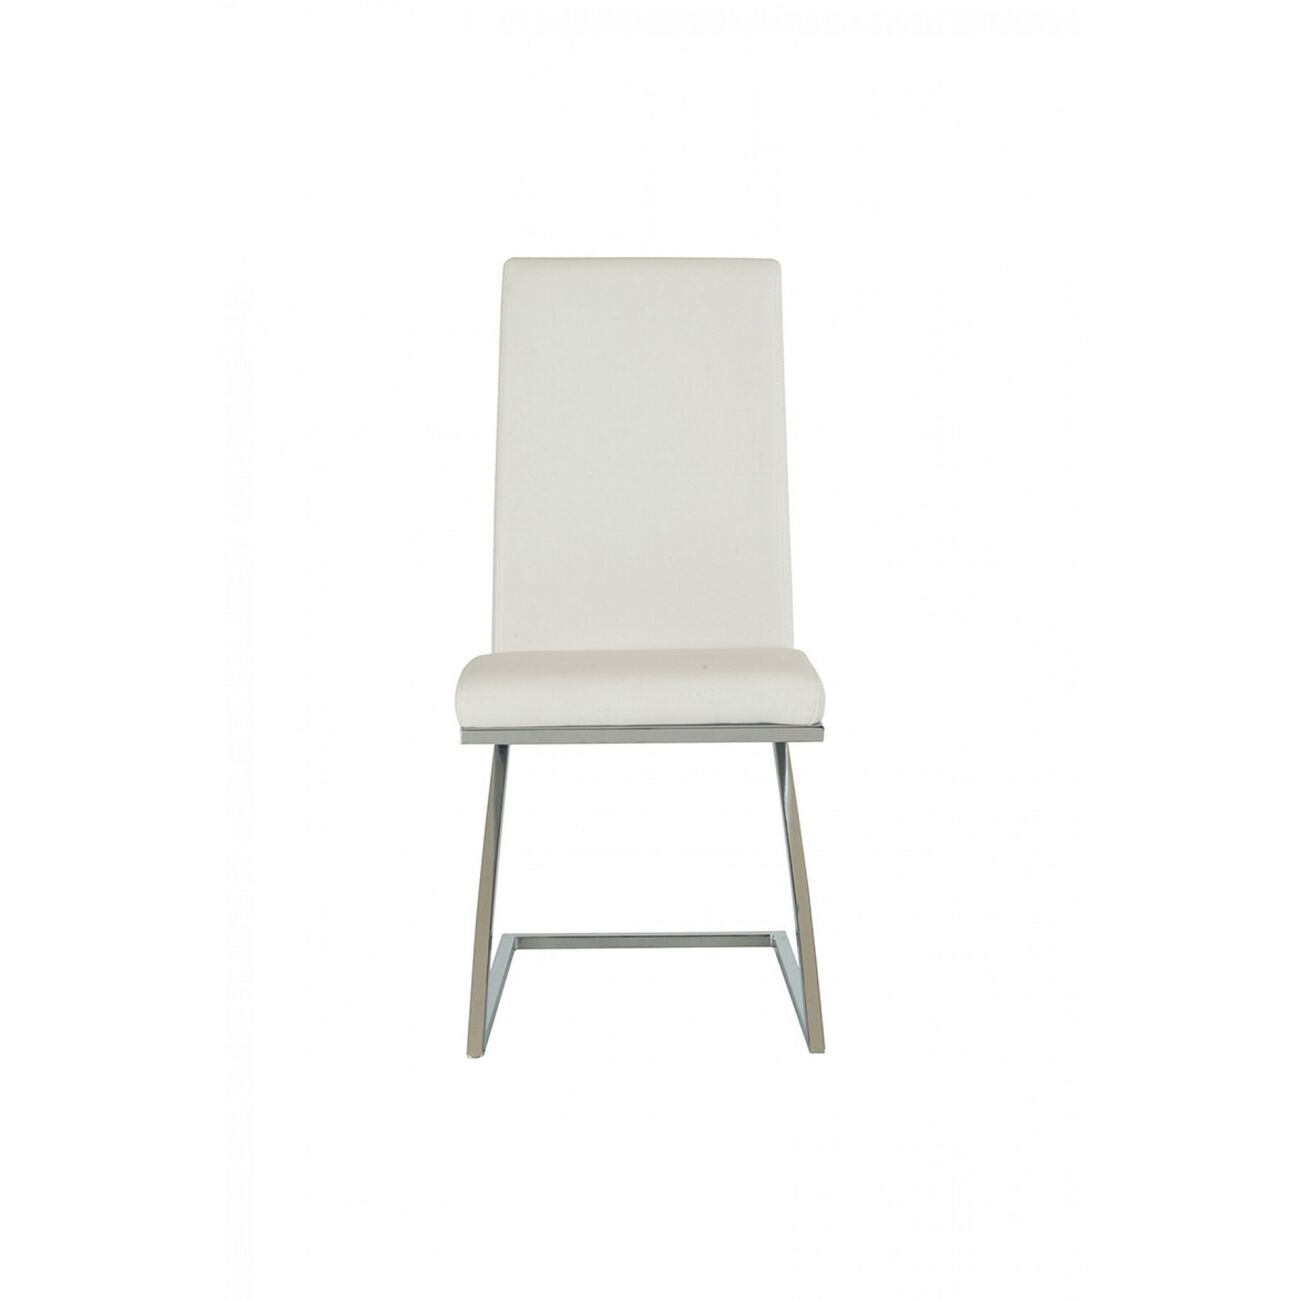 Leatherette Dining Chair with Z Shape Metal Base, Set of 2, White and Chrome